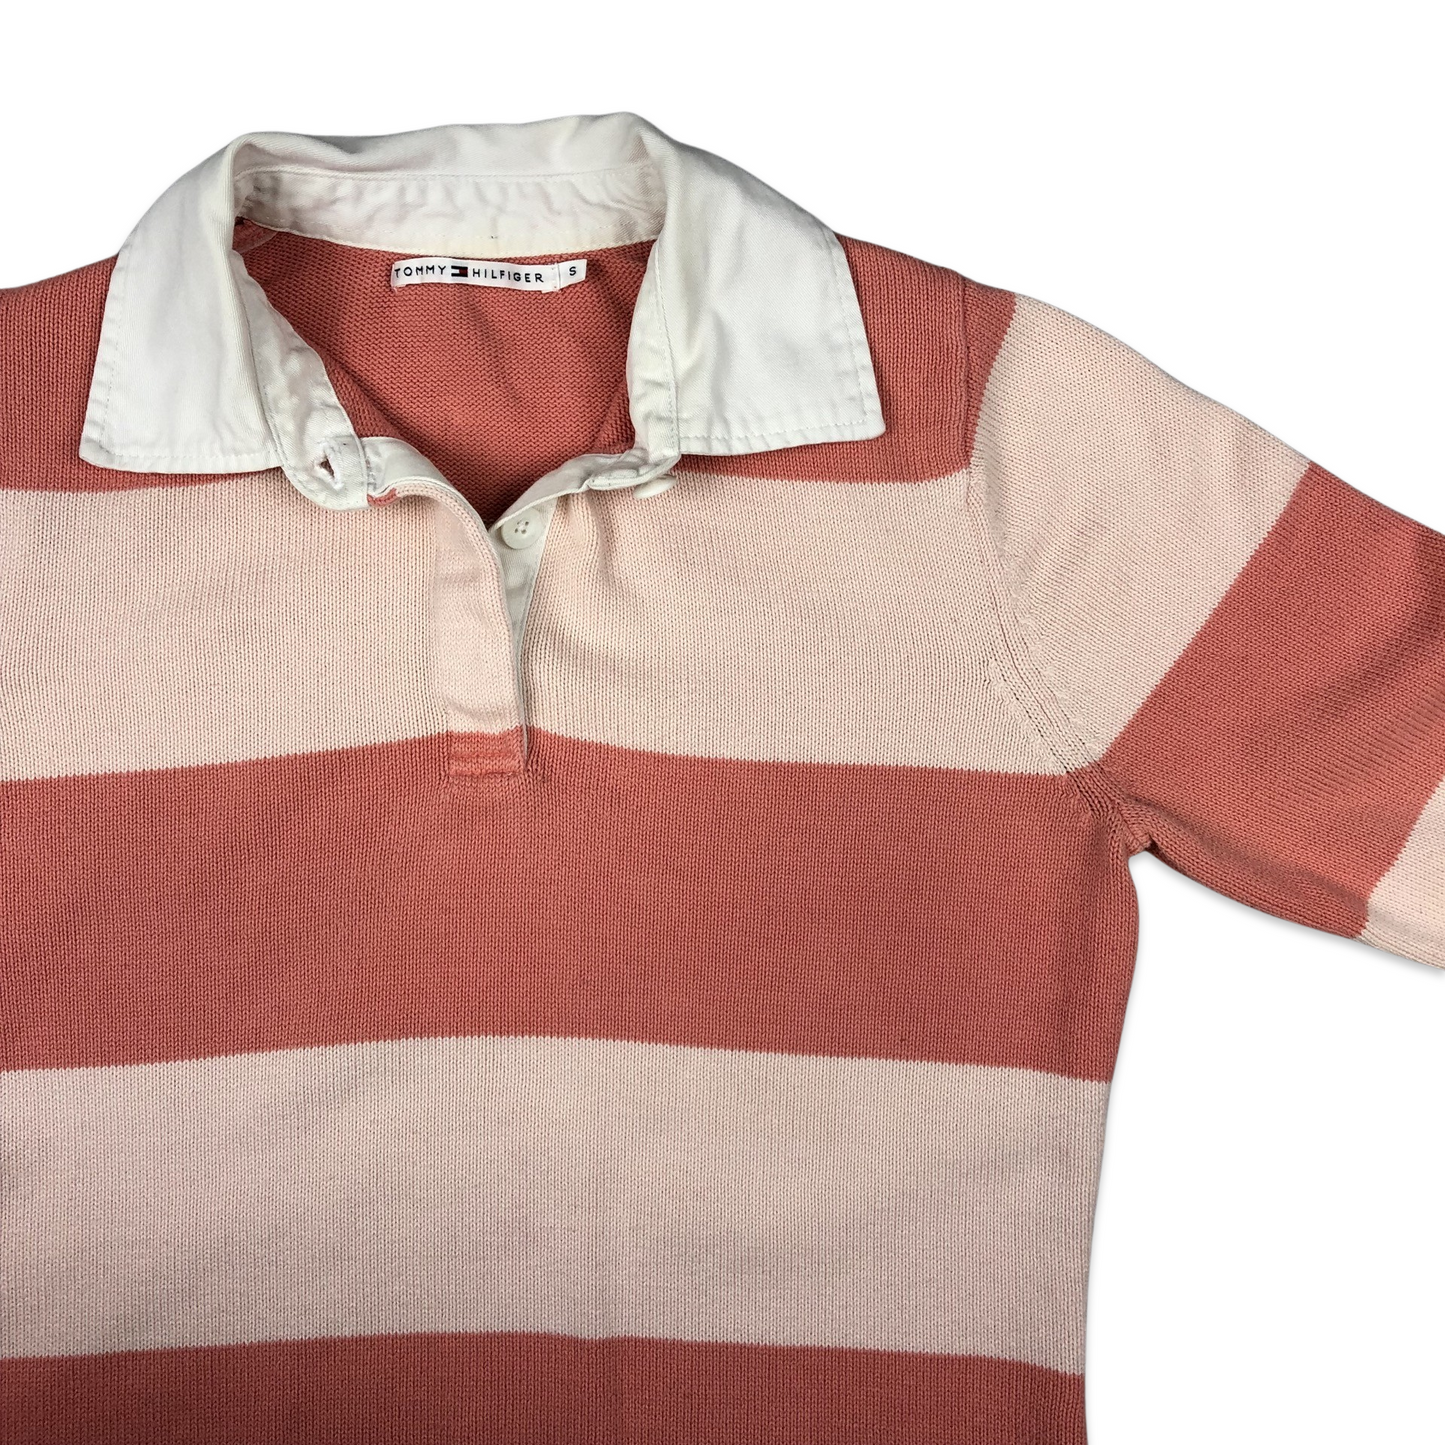 Tommy Hilfiger Rugby Shirt Pink Long Sleeve Striped Spell Out 10 12